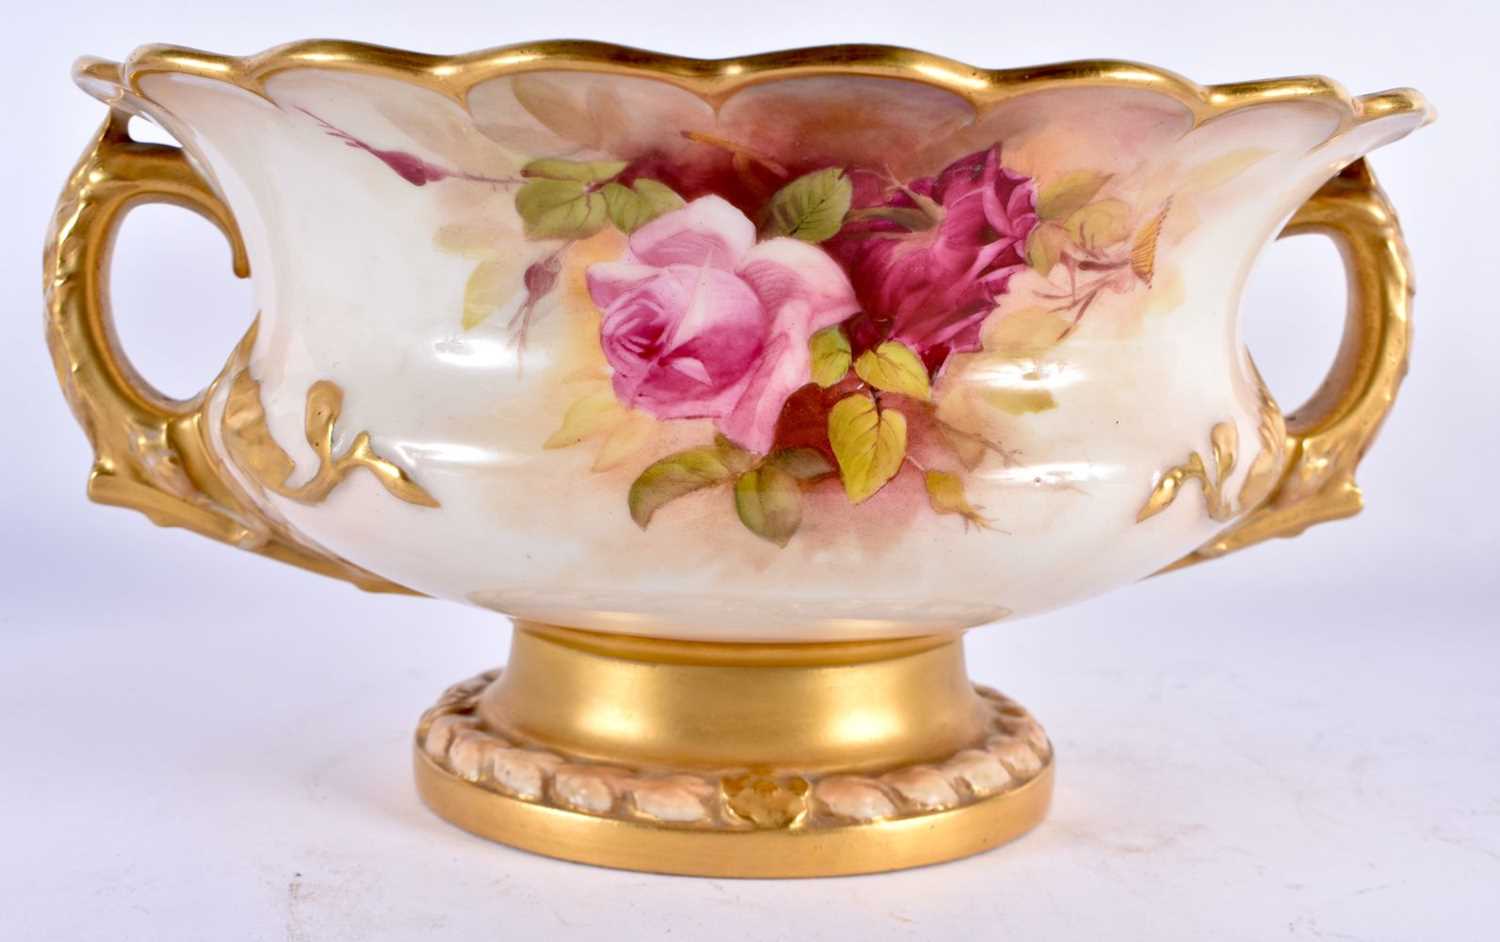 A ROYAN WORCESTER TWIN HANDLED PORCELAIN ROSE PAINTED BOWL. 24 cm x 13 cm. - Image 2 of 7